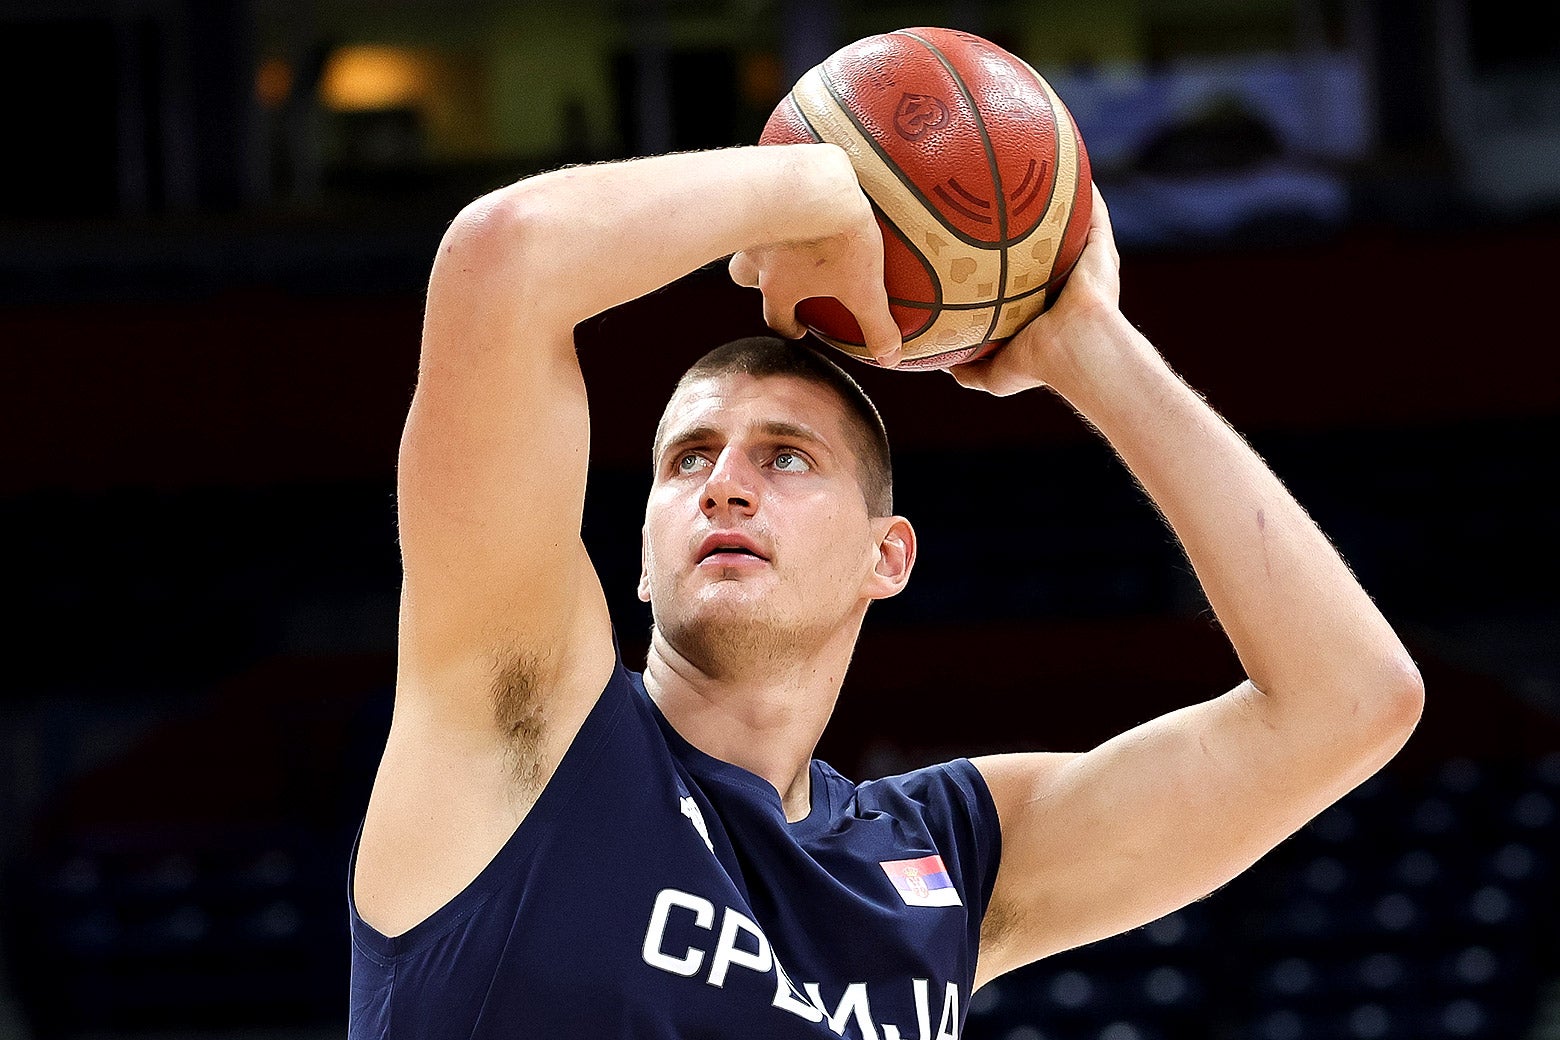 Nikola Jokić, wearing a navy jersey, holds a basketball over his head and prepares to throw it.